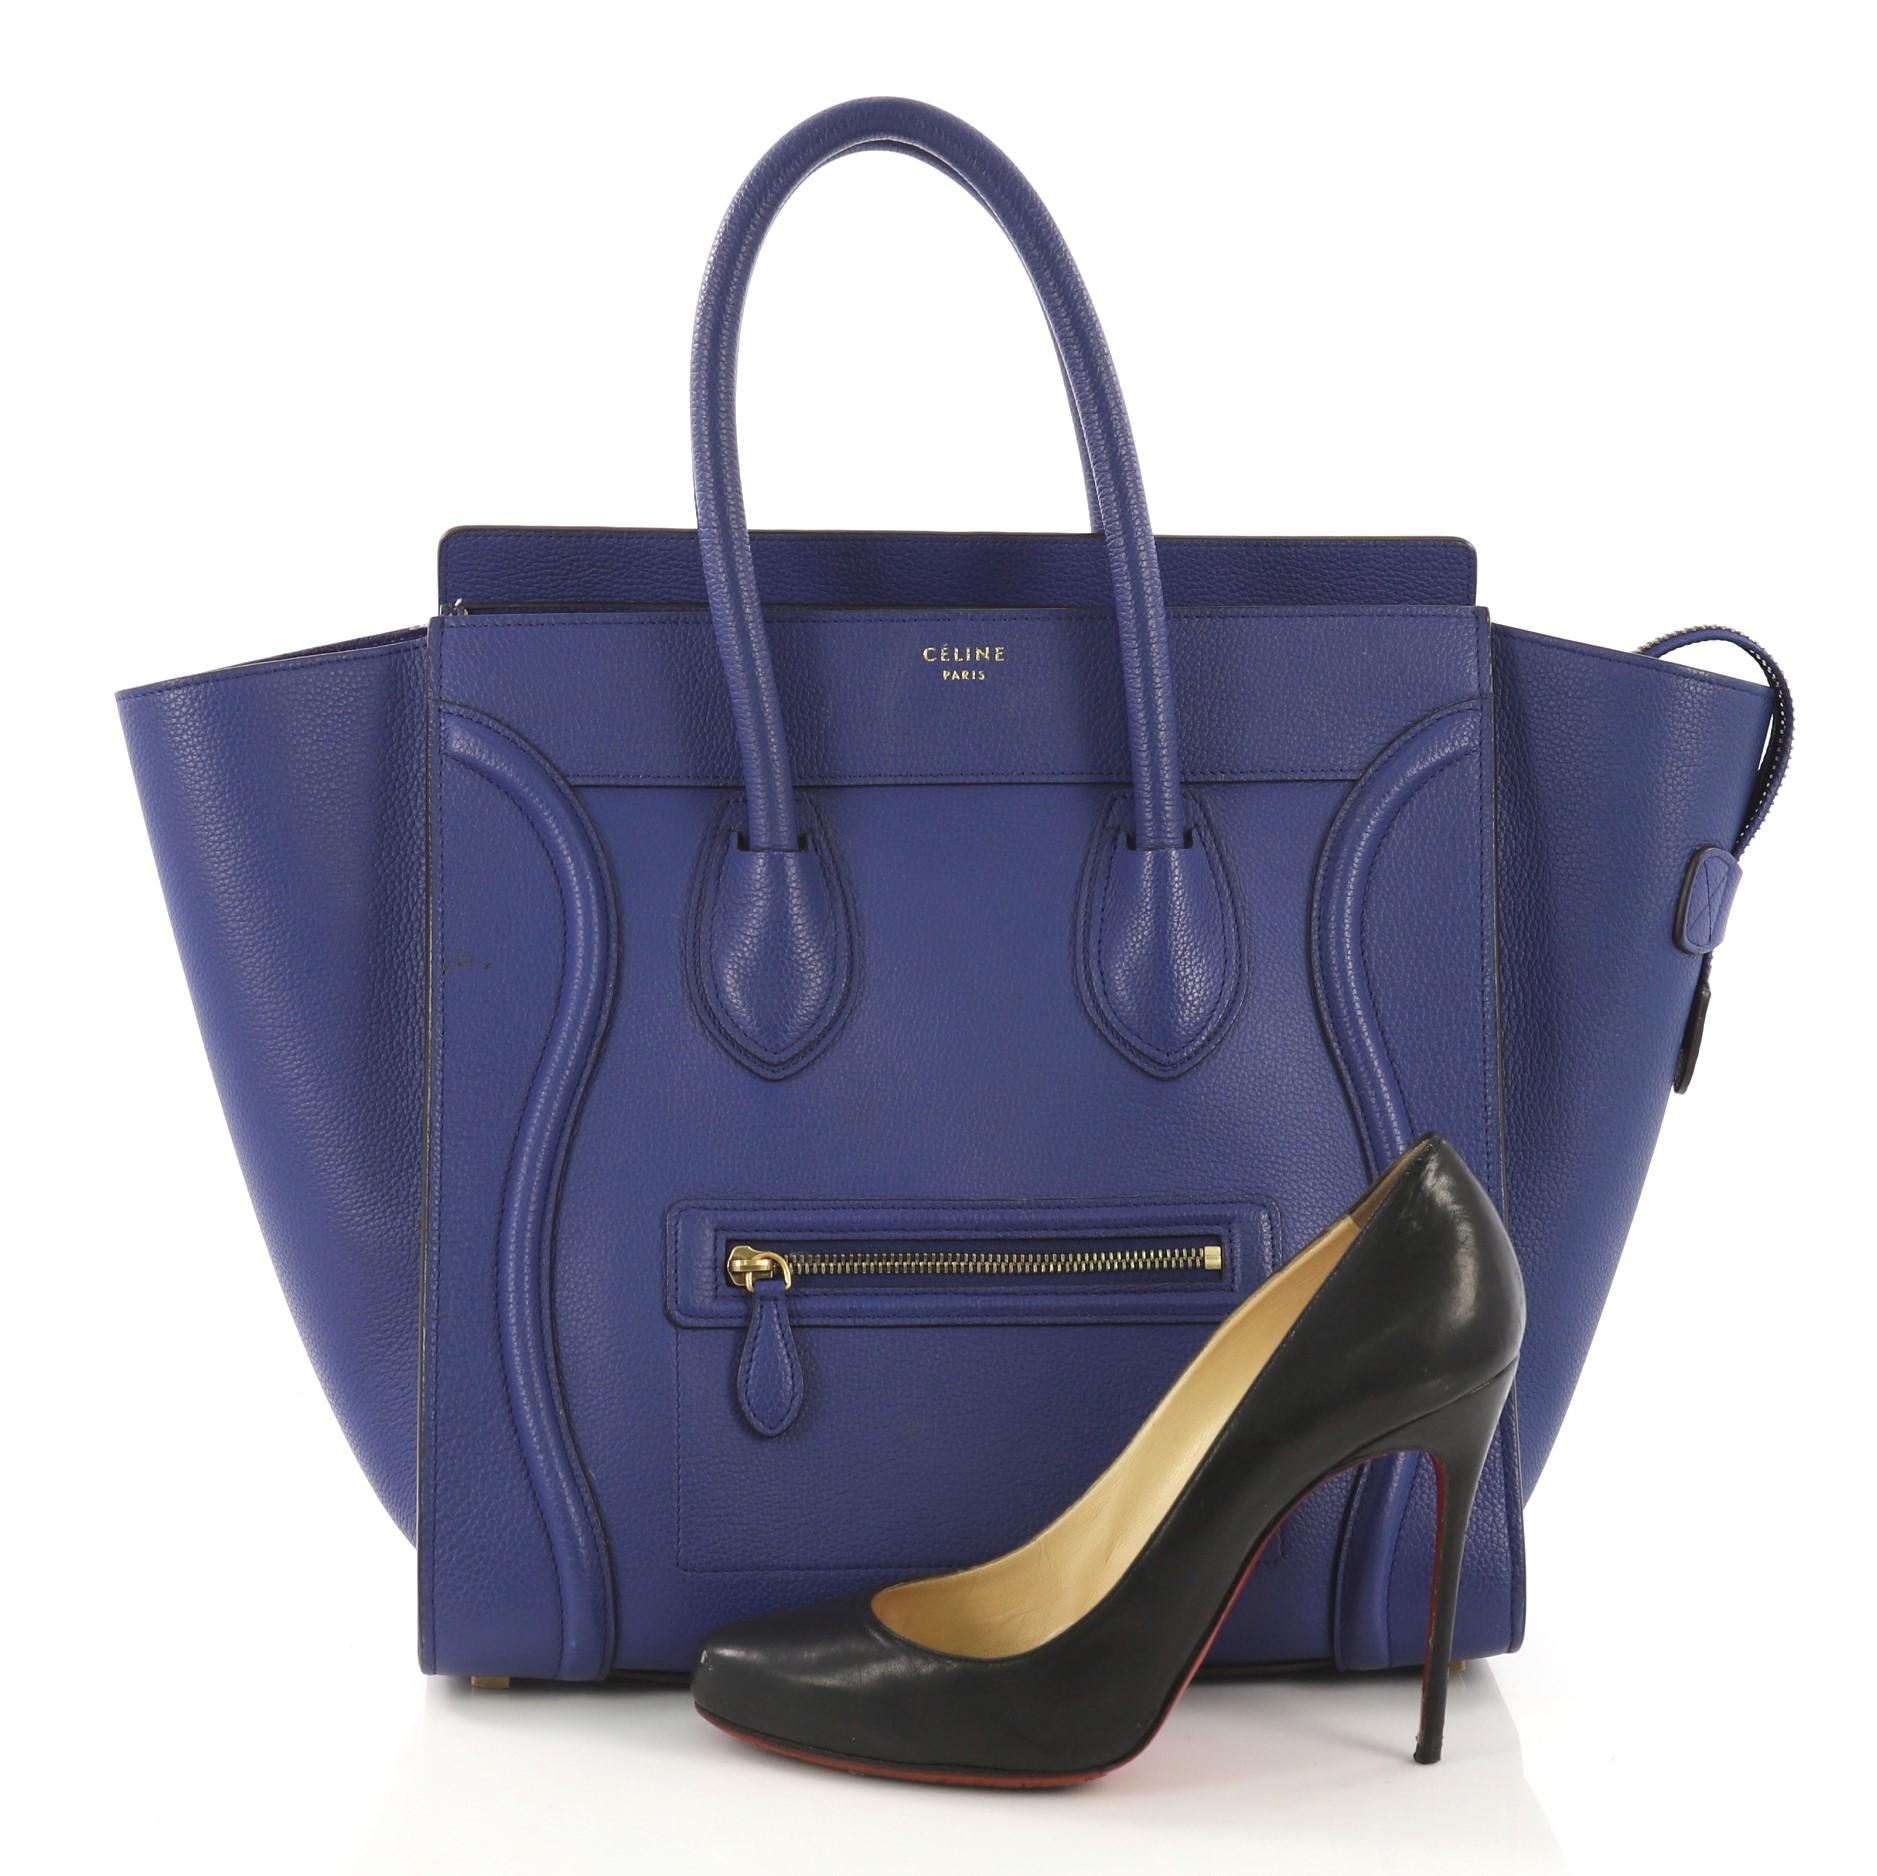 This Celine Luggage Handbag Grainy Leather Mini, crafted in blue grainy leather, features dual rolled leather handles, front zip pocket, and aged gold-tone hardware. Its zip closure opens to a blue suede interior with zip and slip pockets. **Note: